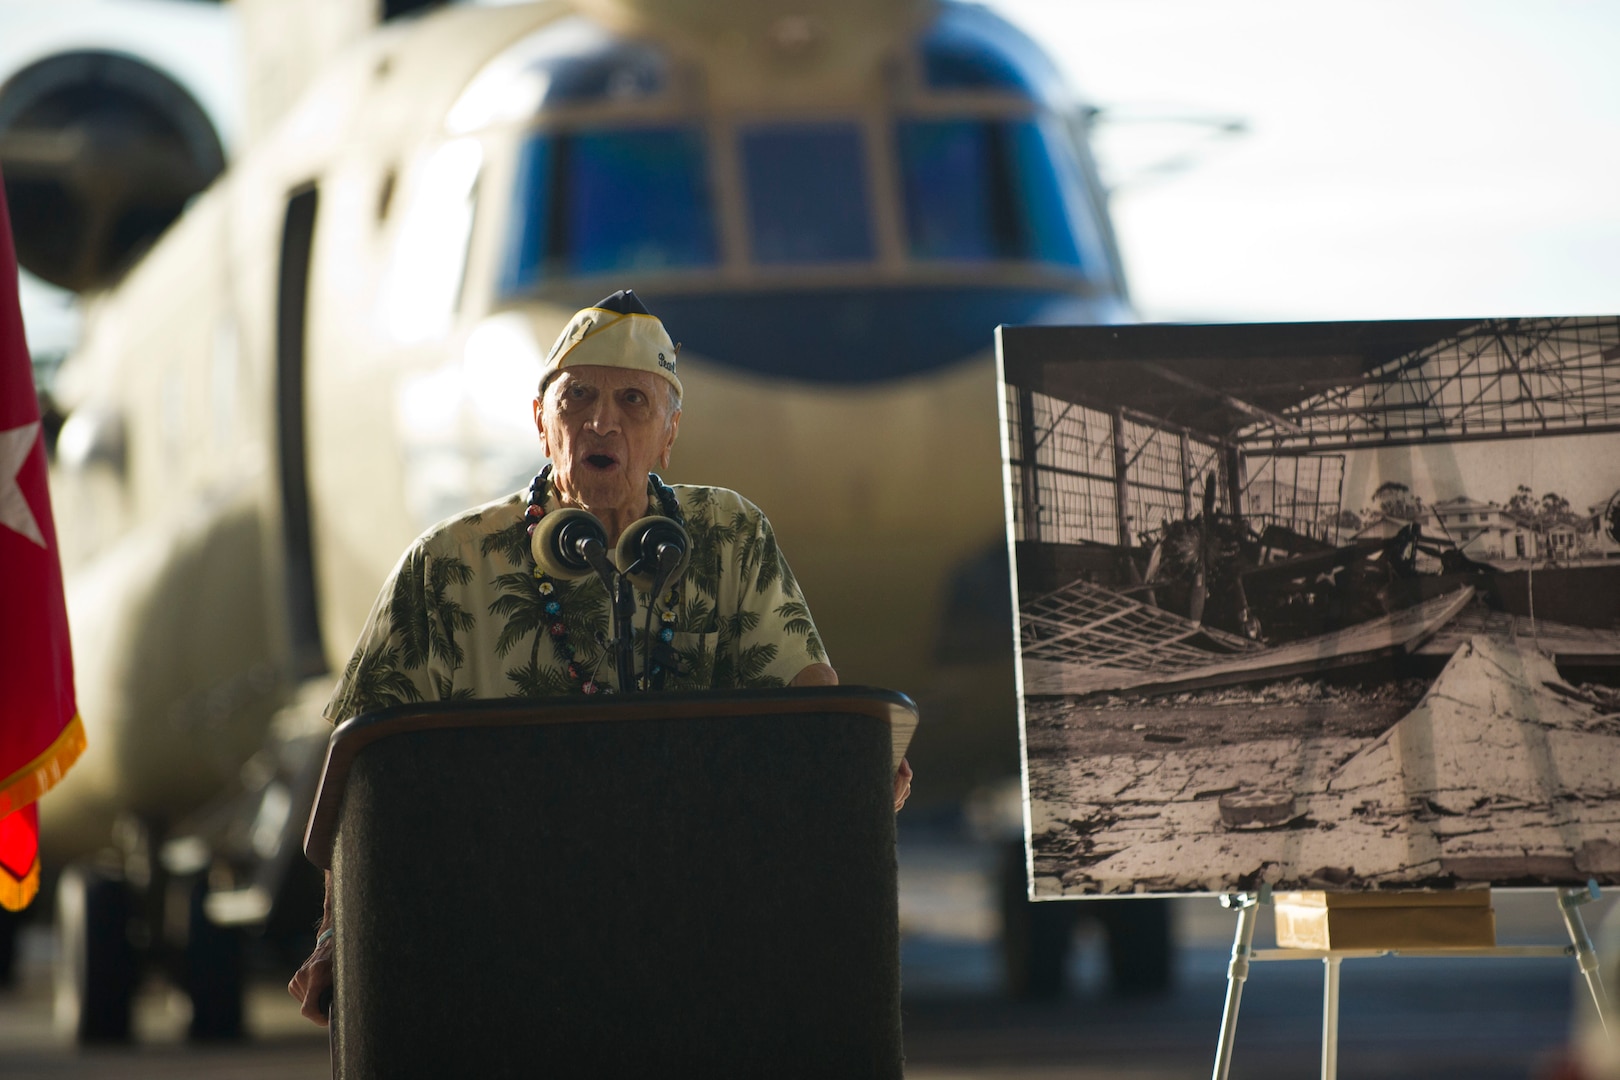 During a wreath-laying and tribute ceremony at Wheeler Army Airfield, Hawaii, Dec. 5, 2016, Pearl Harbor survivor Thomas Petso describes the Dec. 7, 1941, Japanese attack on the field. More than 30 men were killed and 50 injured at the airfield in the attack.